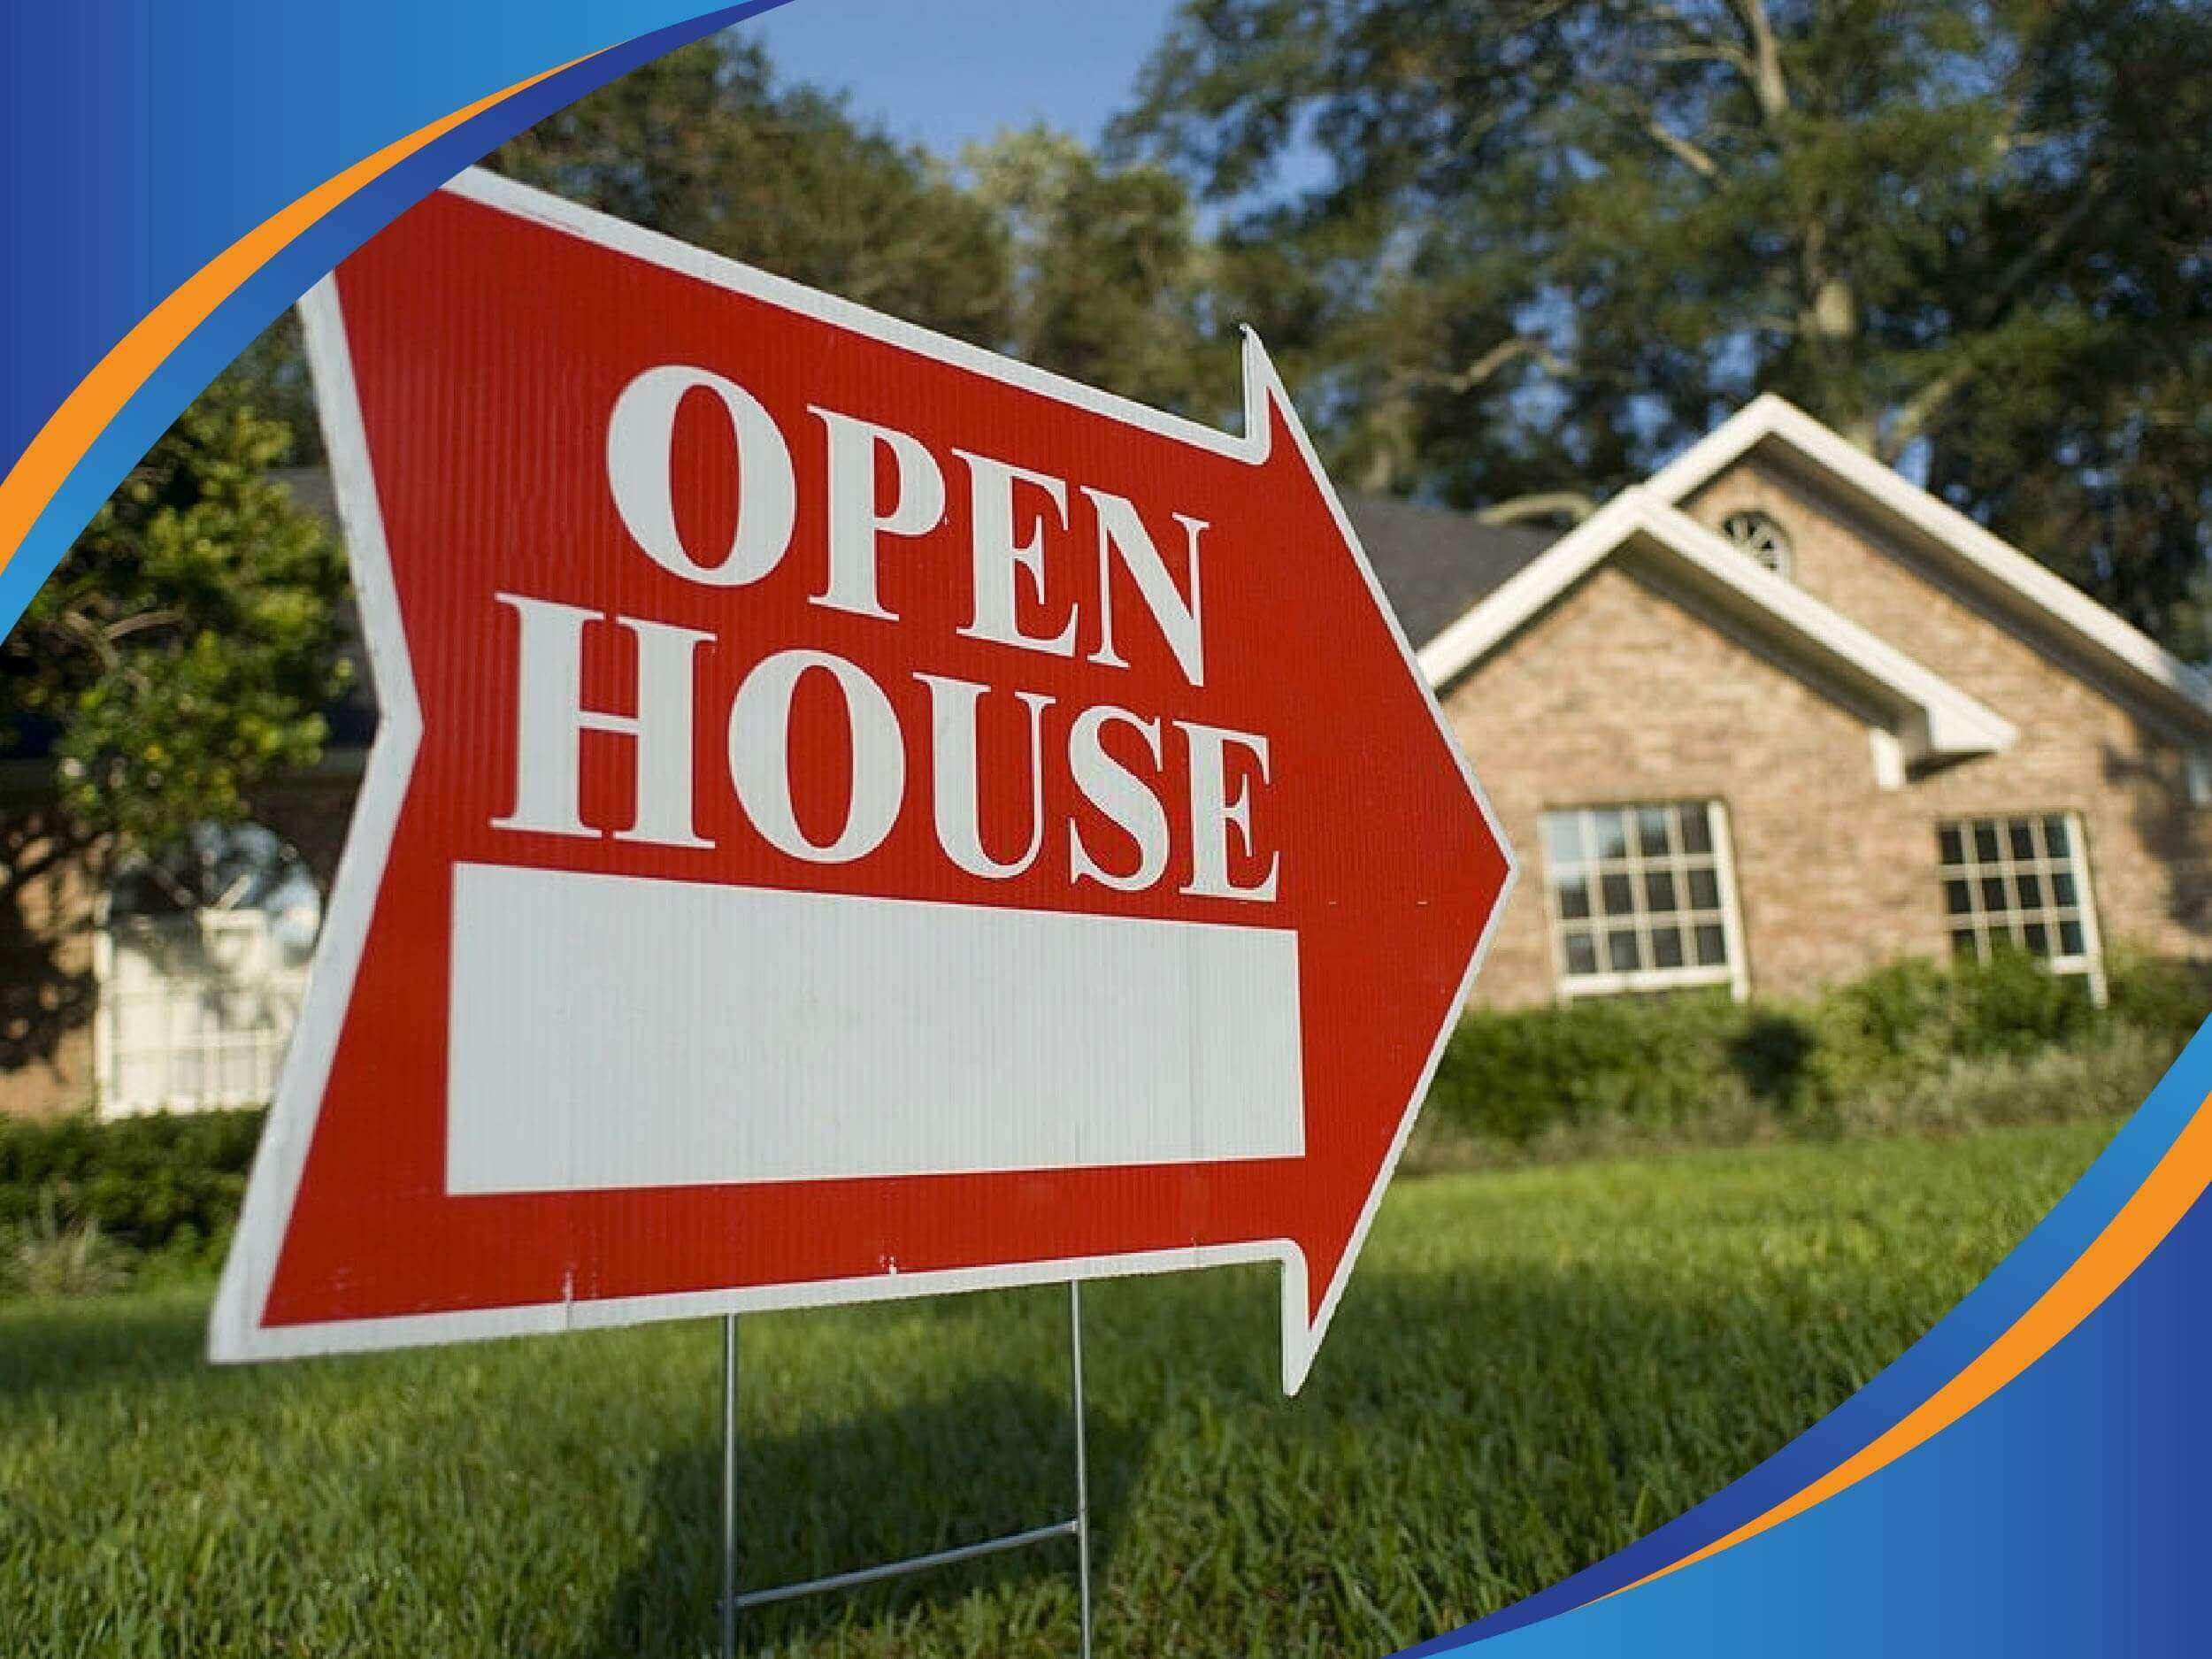 open houses and private showings – property open houses – property private showings - real estate open houses and private showings – property selling services - services – al sadat marketing services - al sadat marketing - alsadat marketing - al-sadat marketing - real estate agency - property portal - islamabad - rawalpindi - pakistan